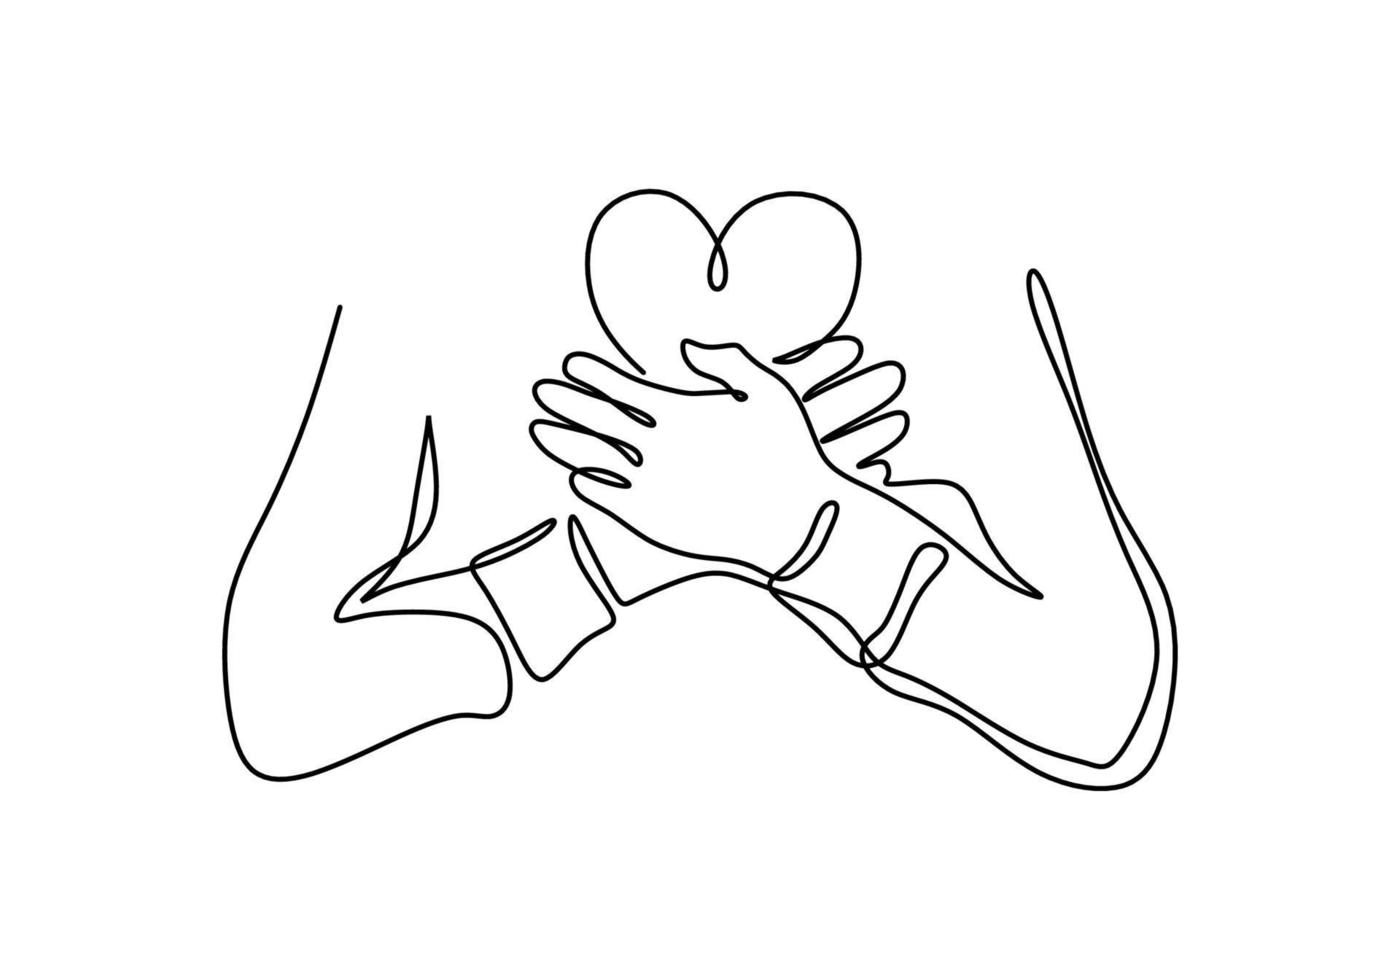 Continuous one line drawing of crossing hand on chest with heart shape vector